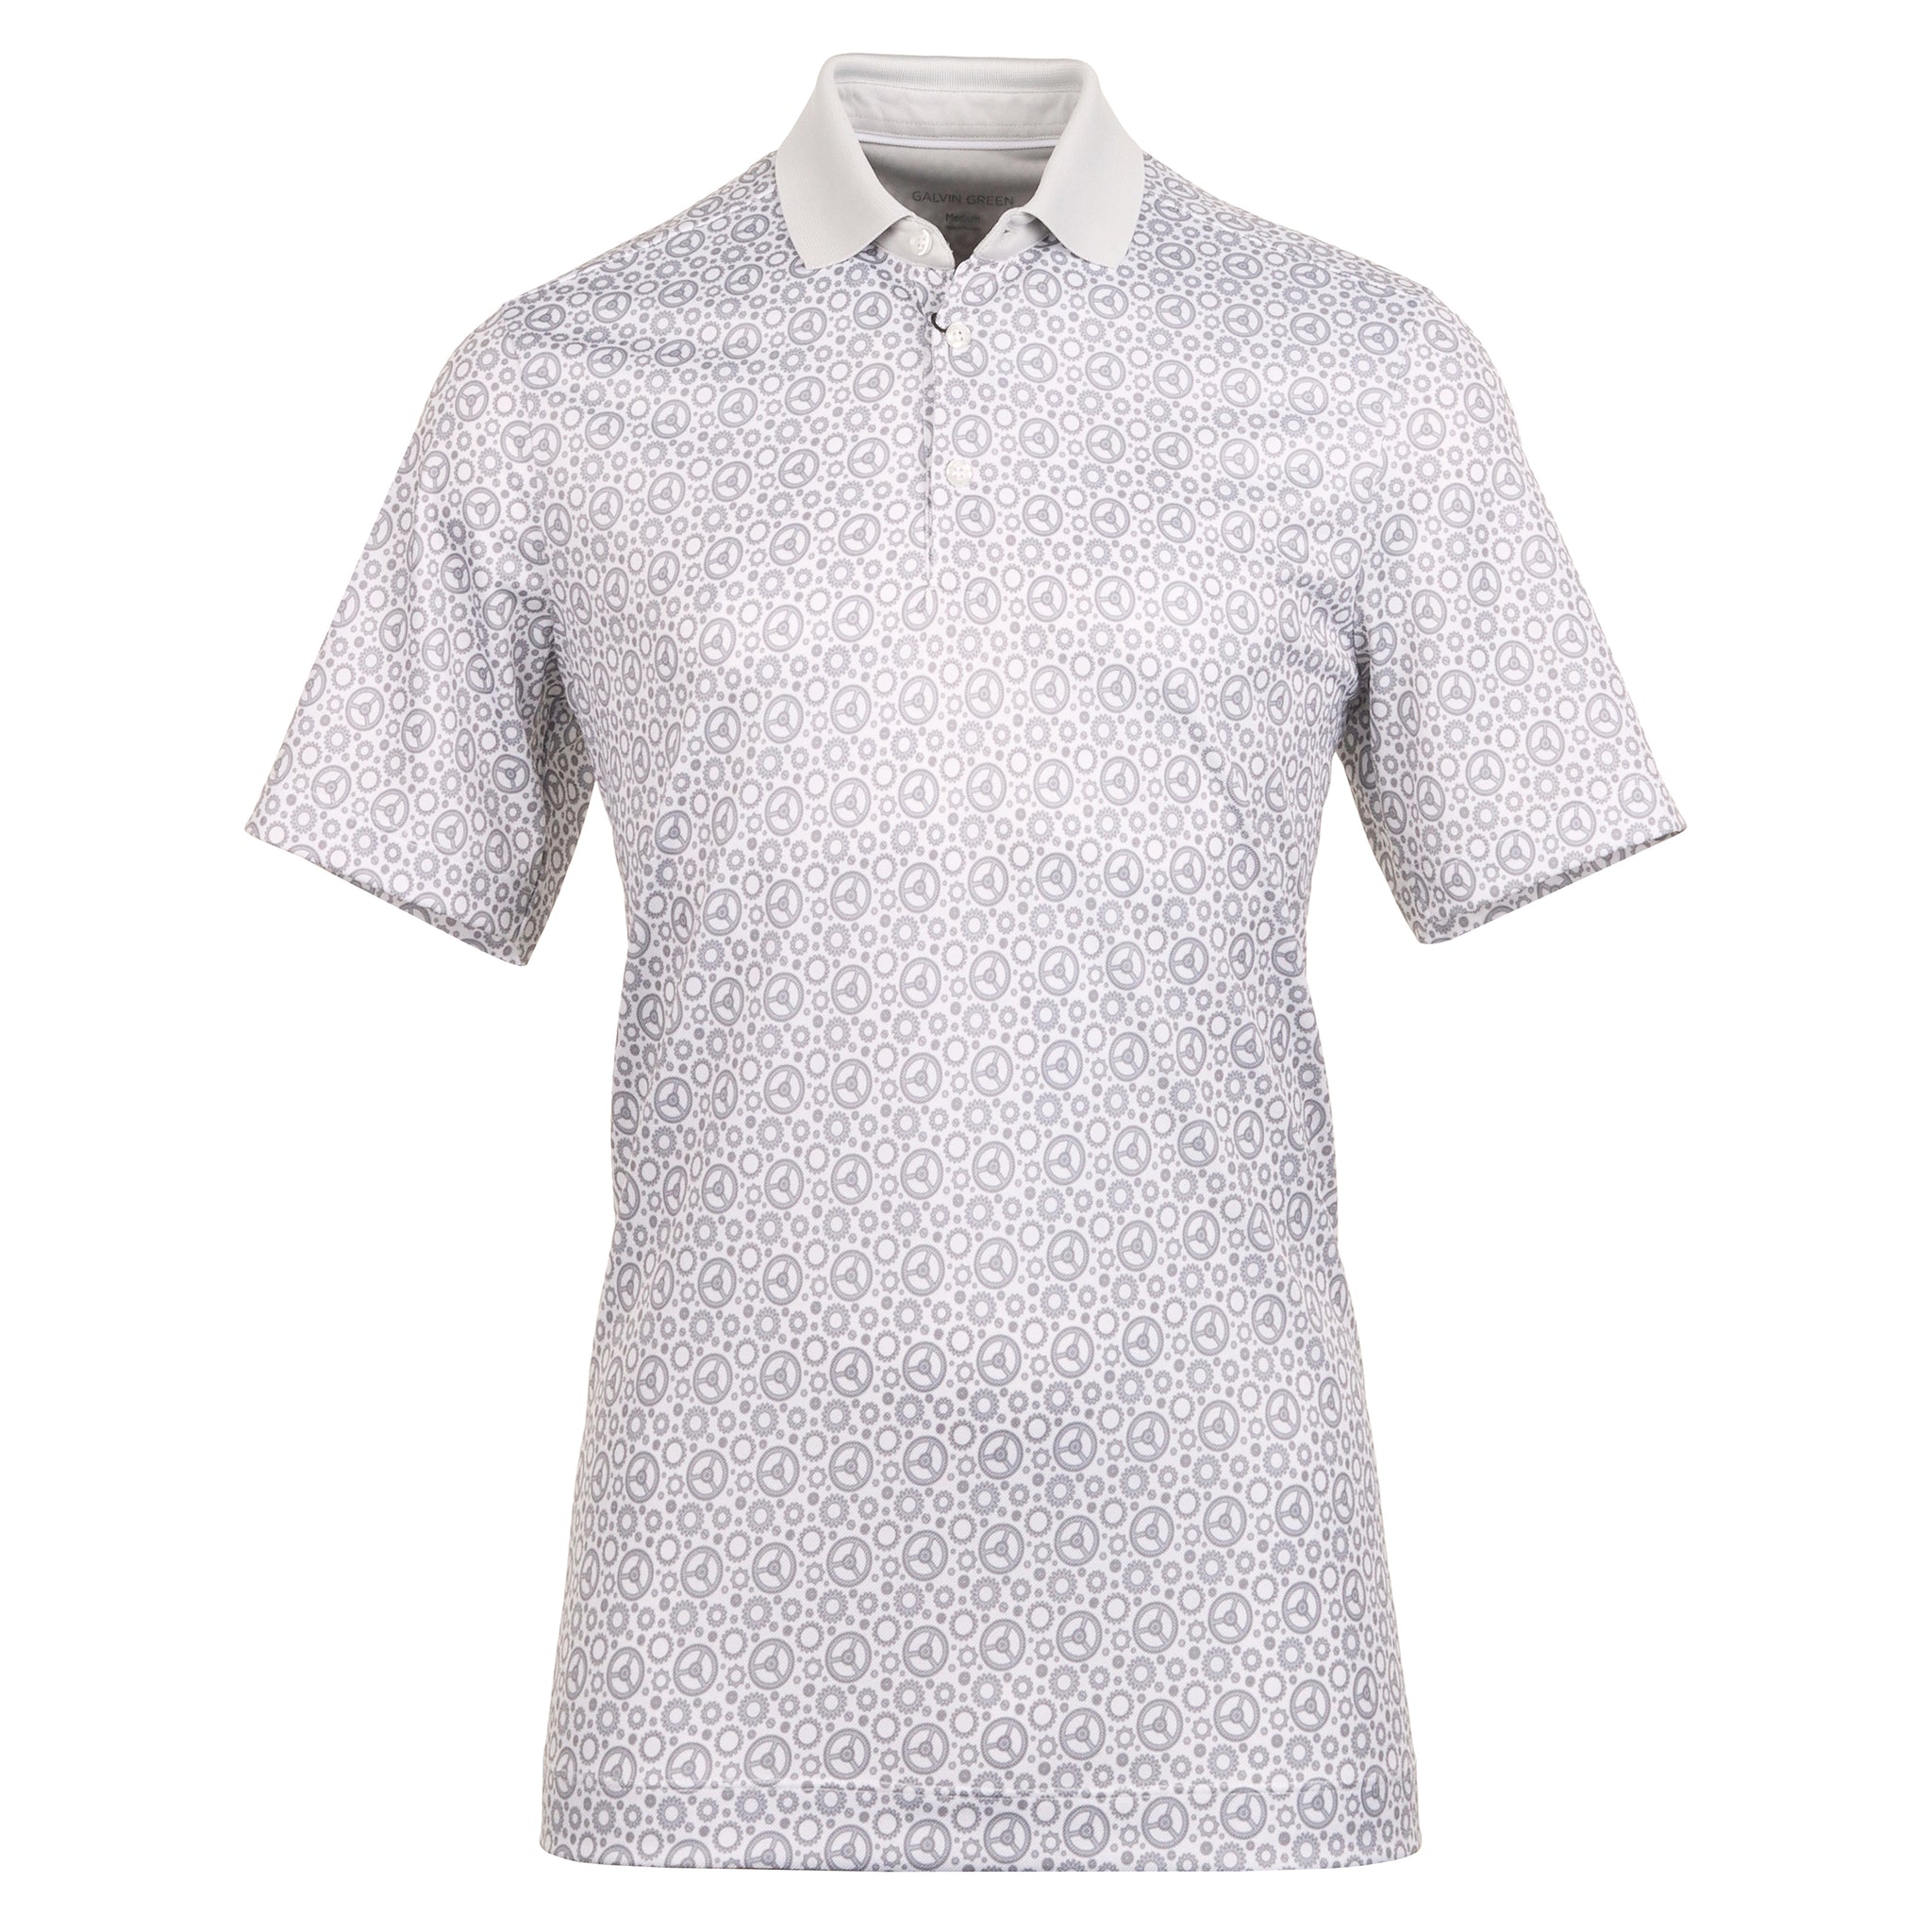 galvin-green-miracle-ventil8-golf-shirt-white-cool-grey-9235